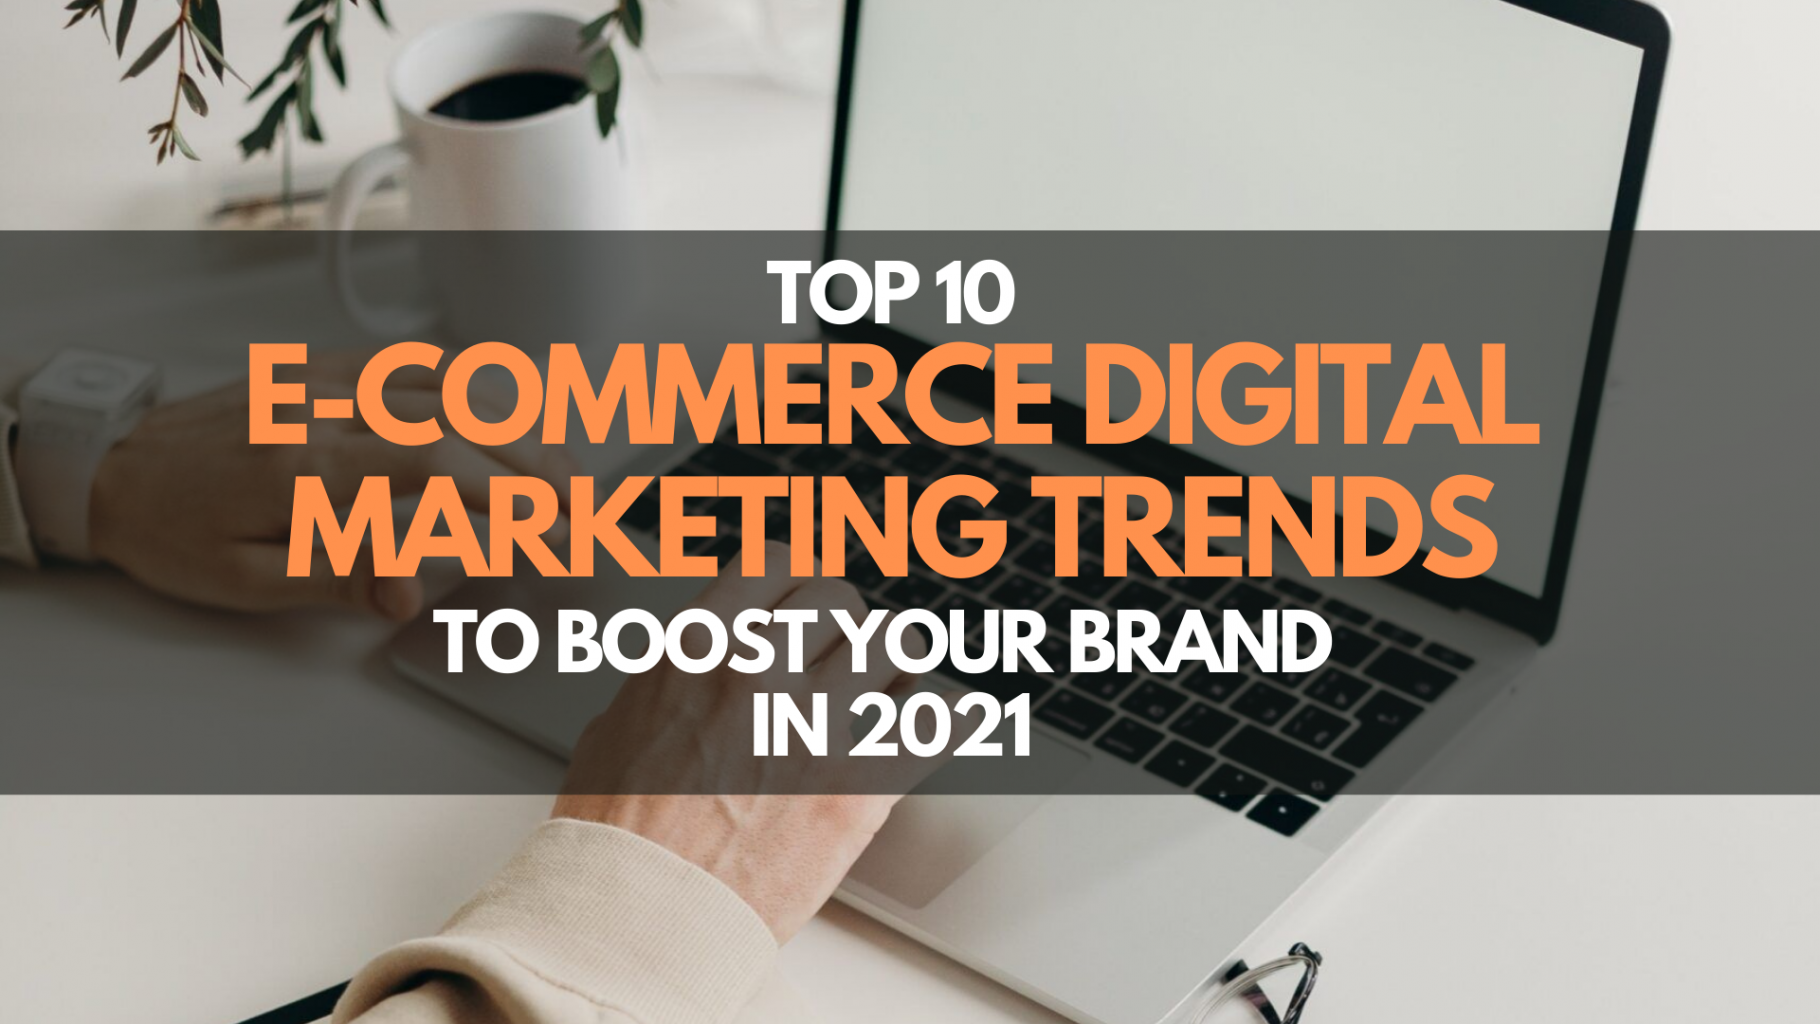 Top 10 E-commerce Digital Marketing Trends to Boost your Brand in 2021